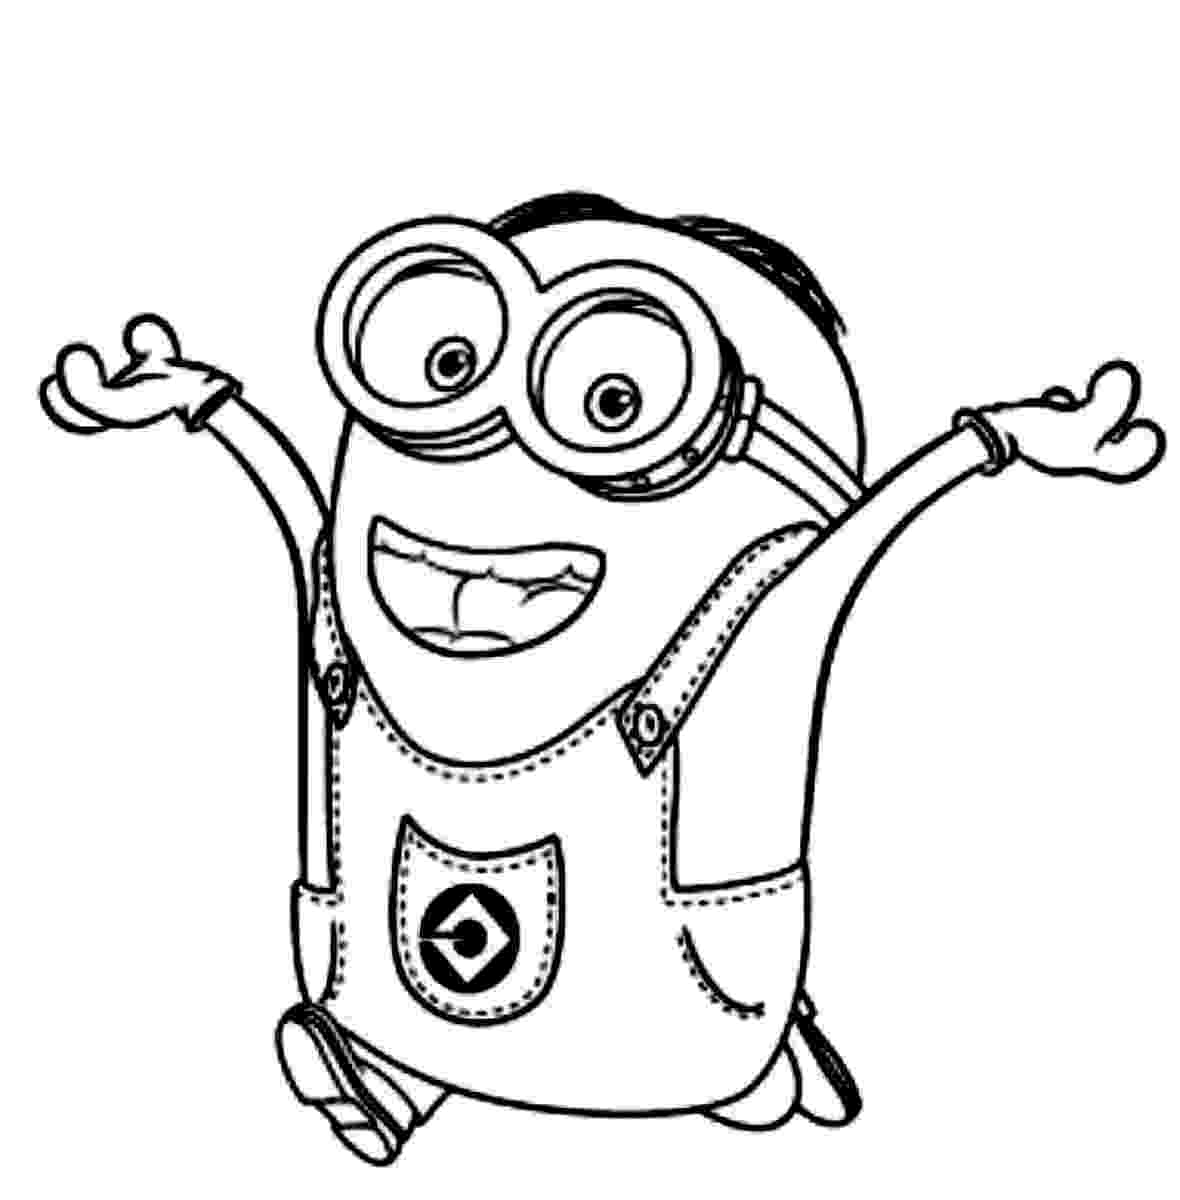 free coloring pages despicable me printable despicable me coloring pages for kids cool2bkids me pages coloring despicable free 